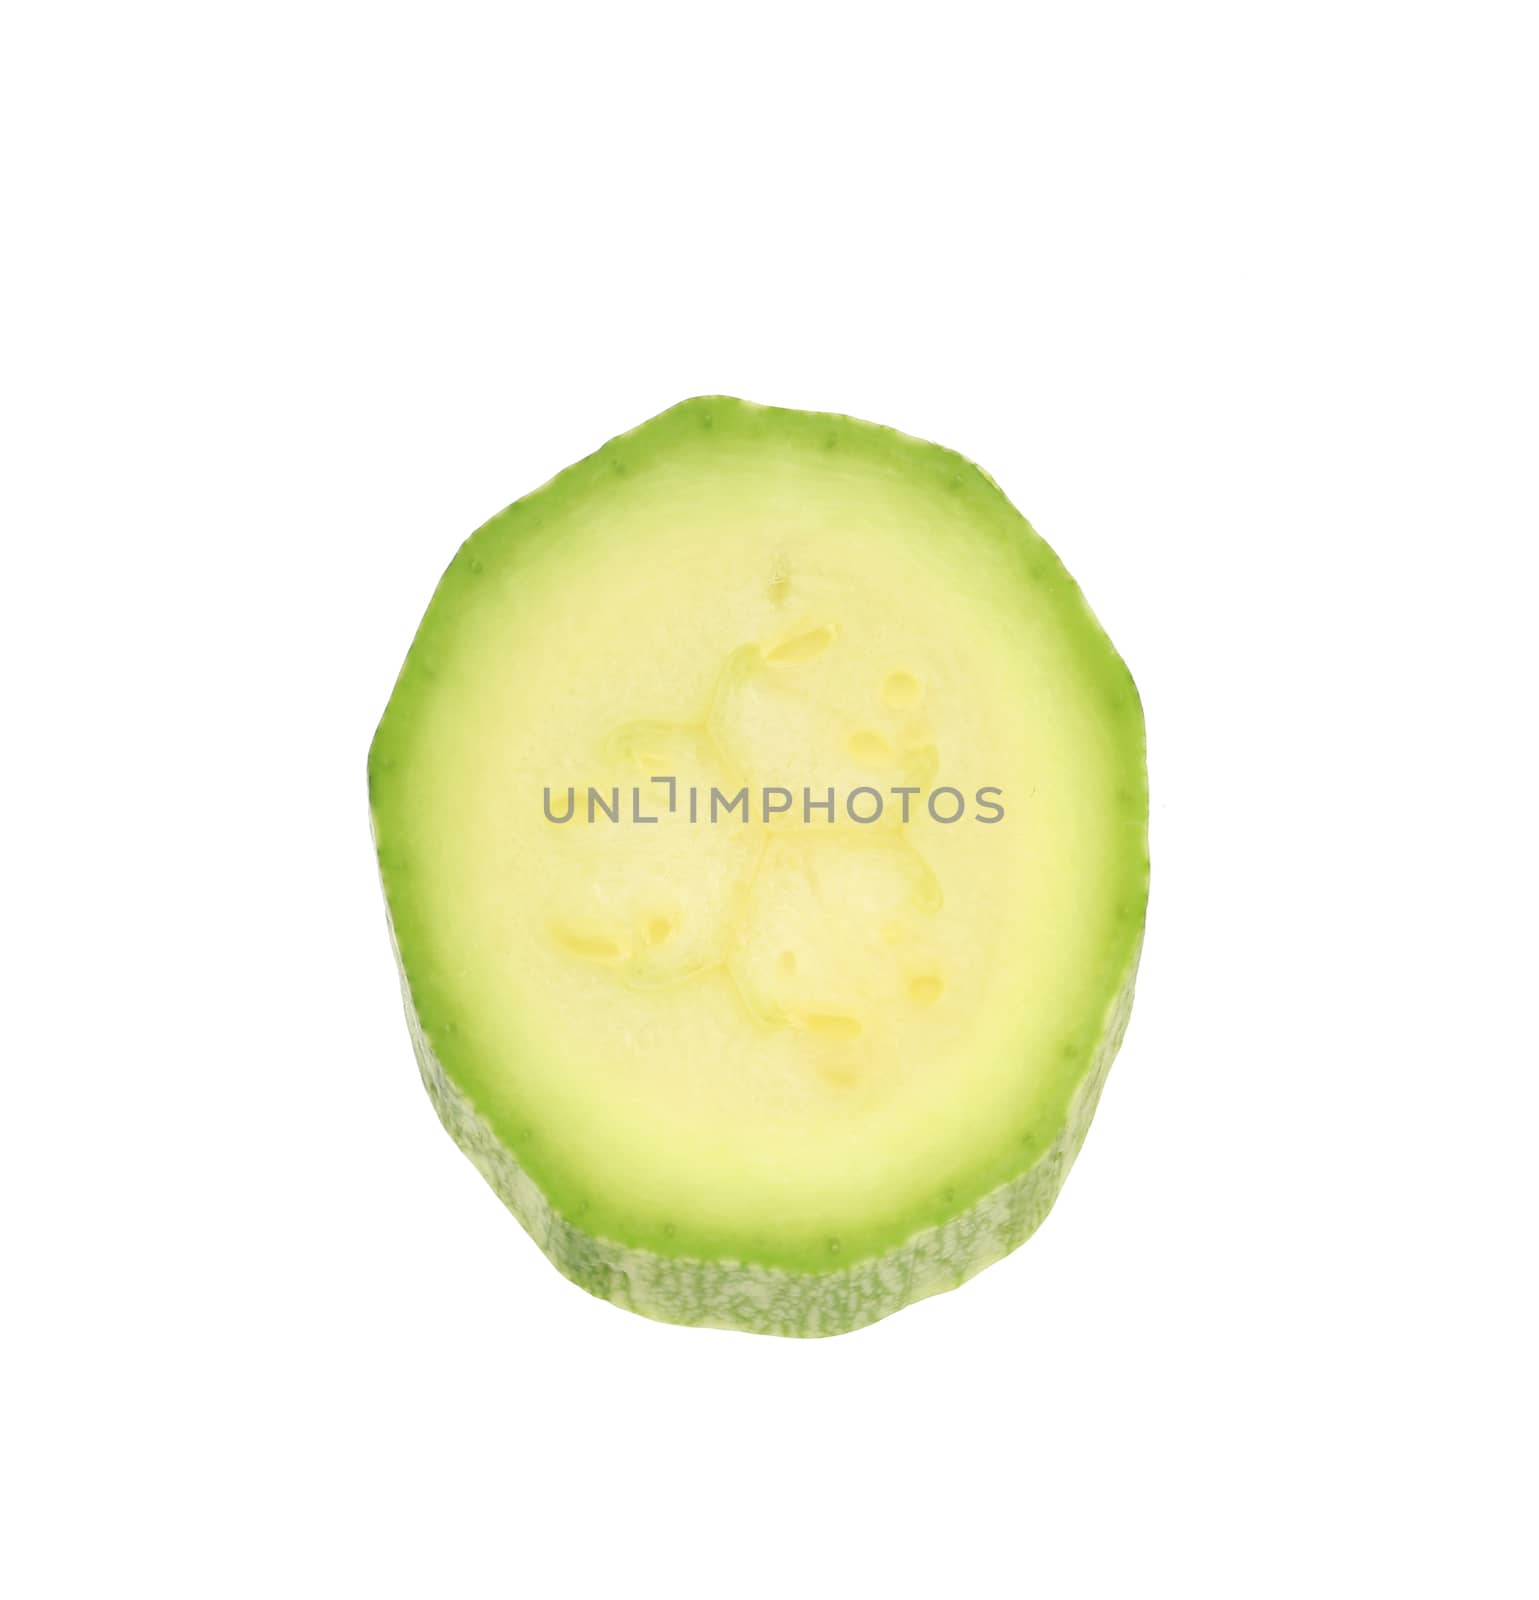 Piece of fresh courgette. Isolated on a white background.